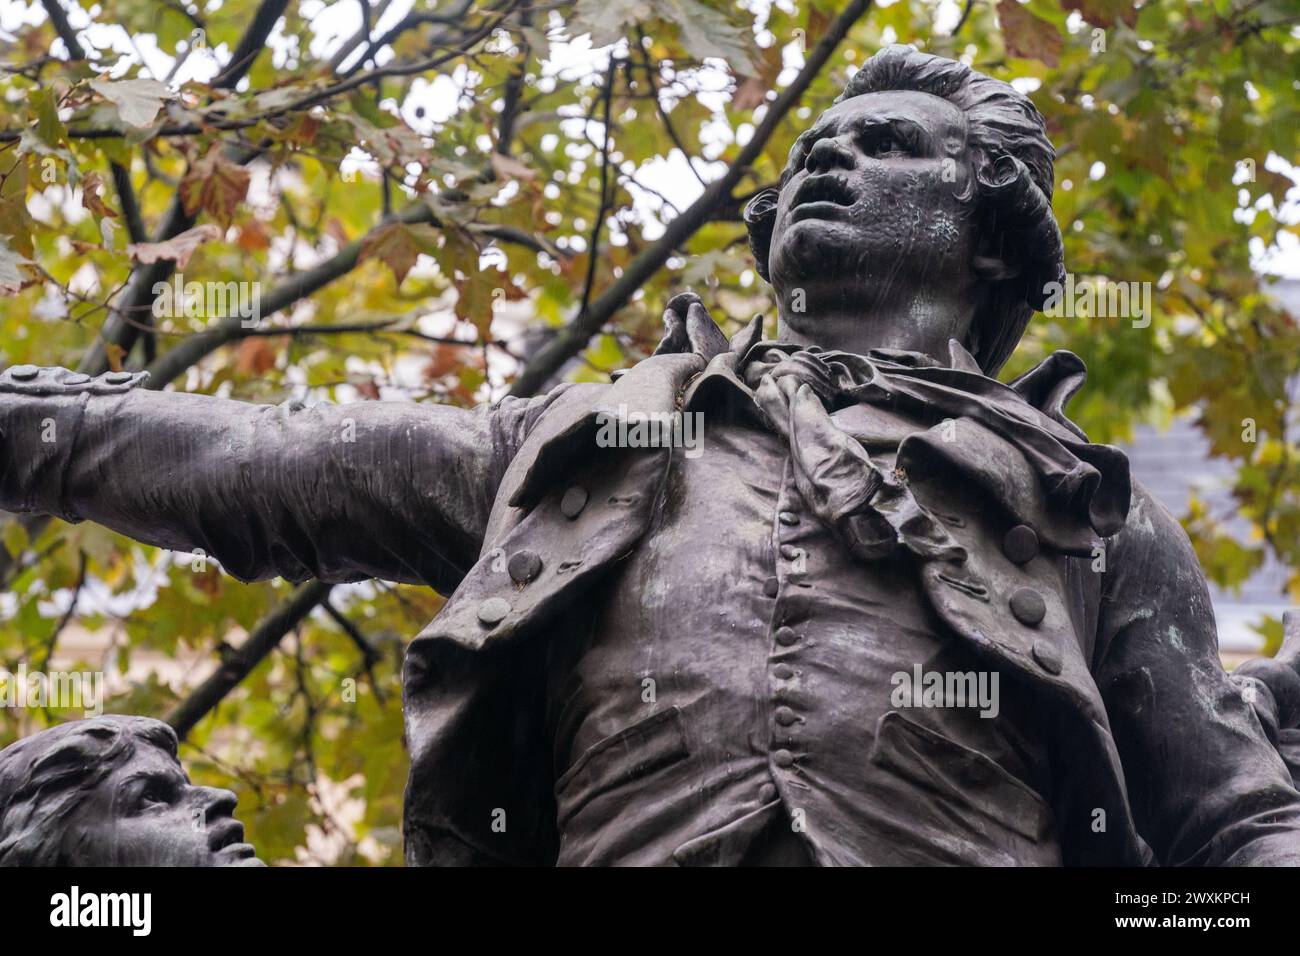 This statue, sculpted by Auguste Paris, depicts Georges Jacques Danton who was a leading figure in the early stages of the French Revolution. Stock Photo